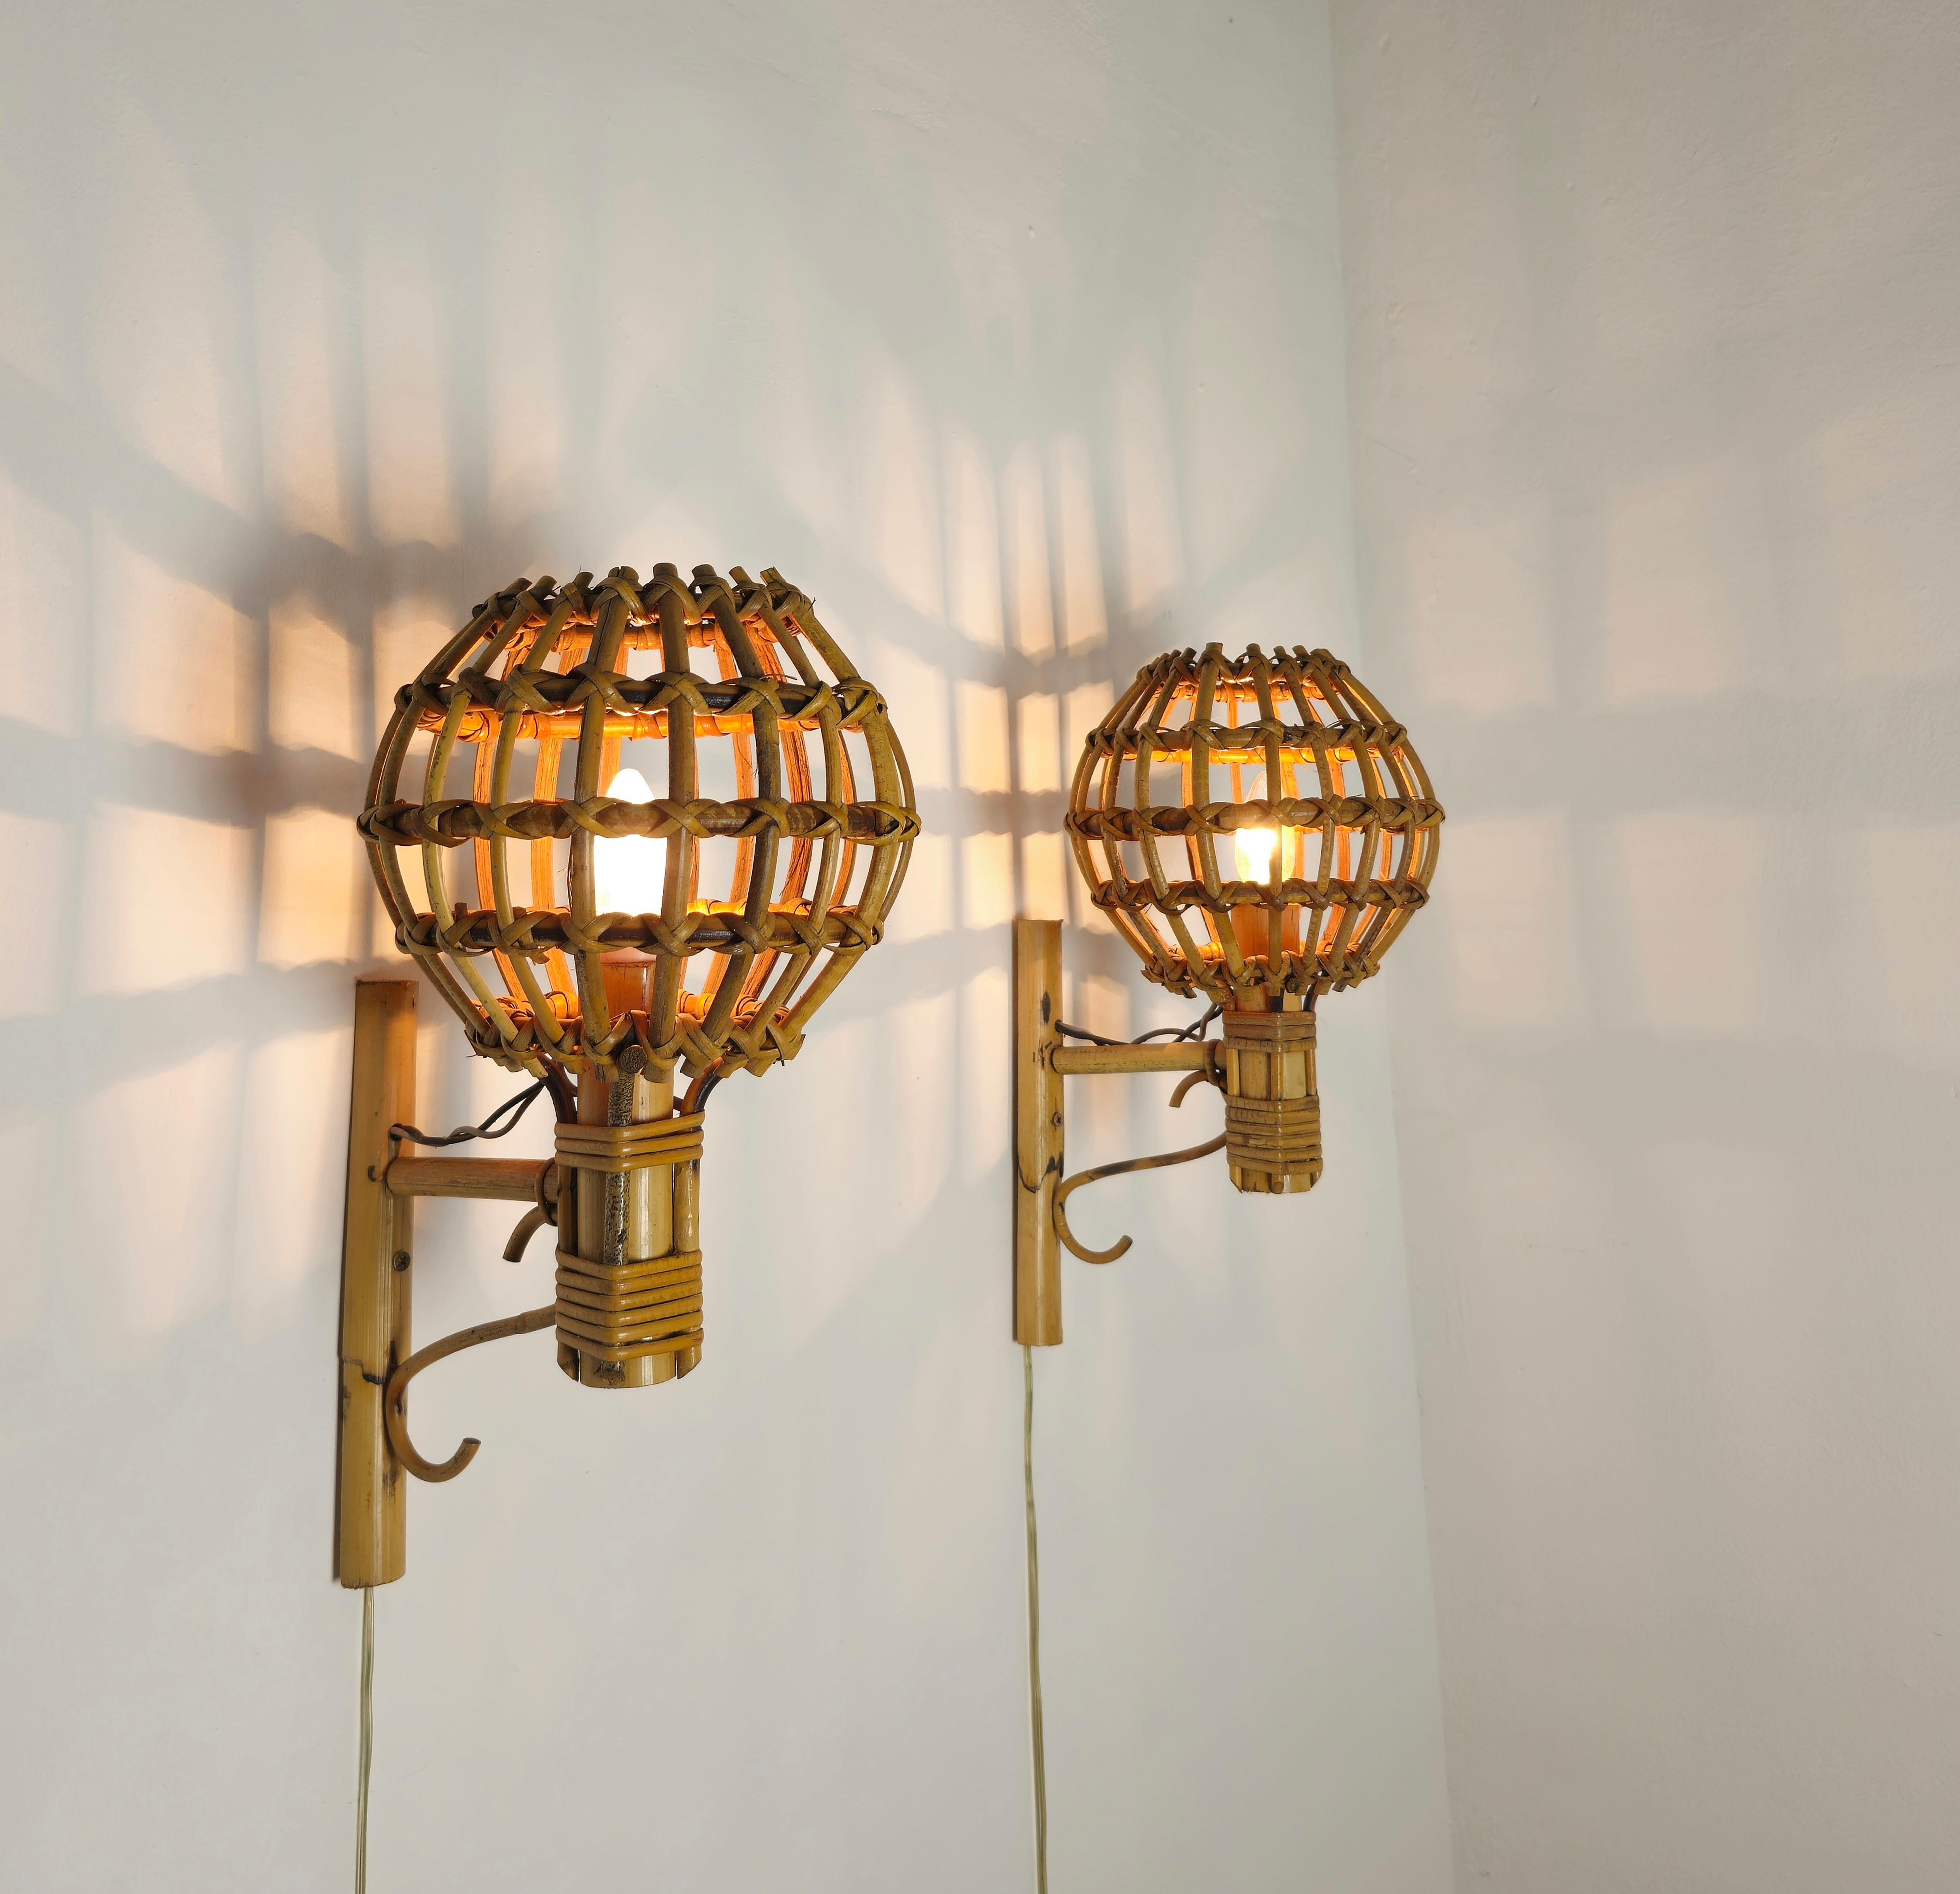 Set of 2 wall lights attributed to the French designer Louis Sognot and produced in France in the 60s.
Every single 